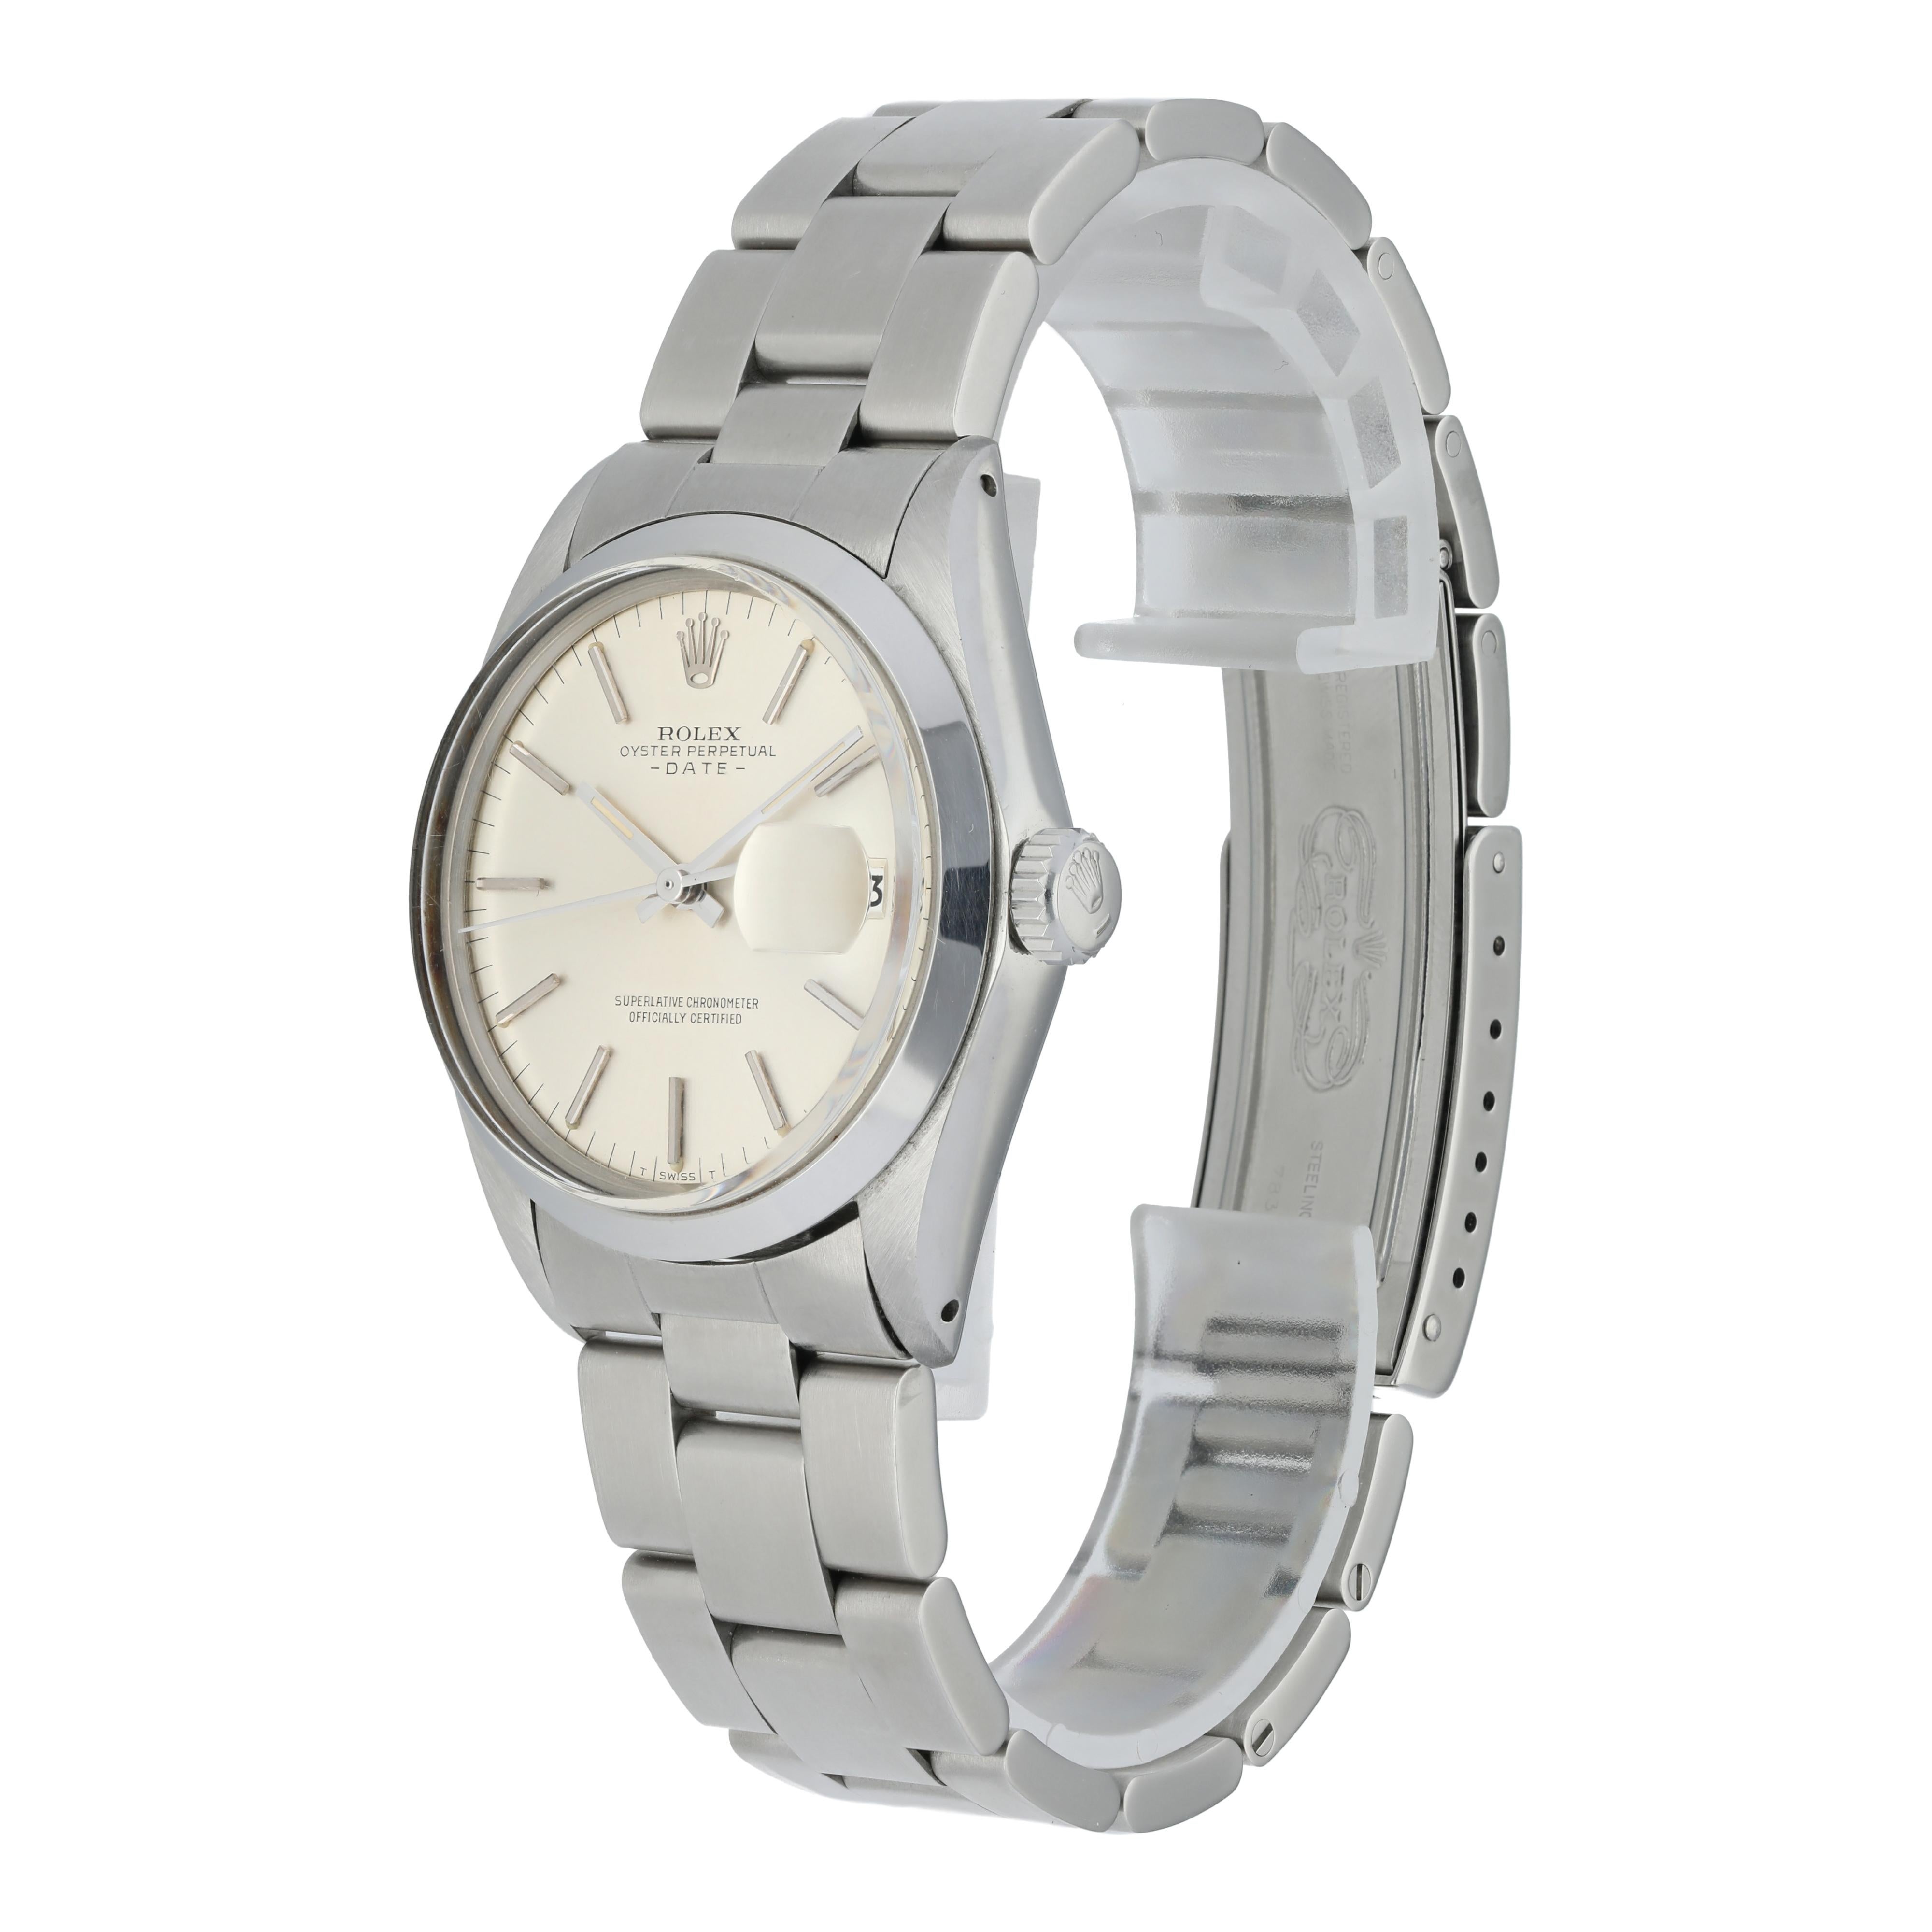 Rolex oyster perpetual Date 1500 Men's Watch.
34mm Stainless Steel case. 
Stainless Steel Stationary bezel. 
Silver dial with steel hands and index hour markers. 
Minute markers on the outer dial. 
Date display at the 3 o'clock position. 
Stainless